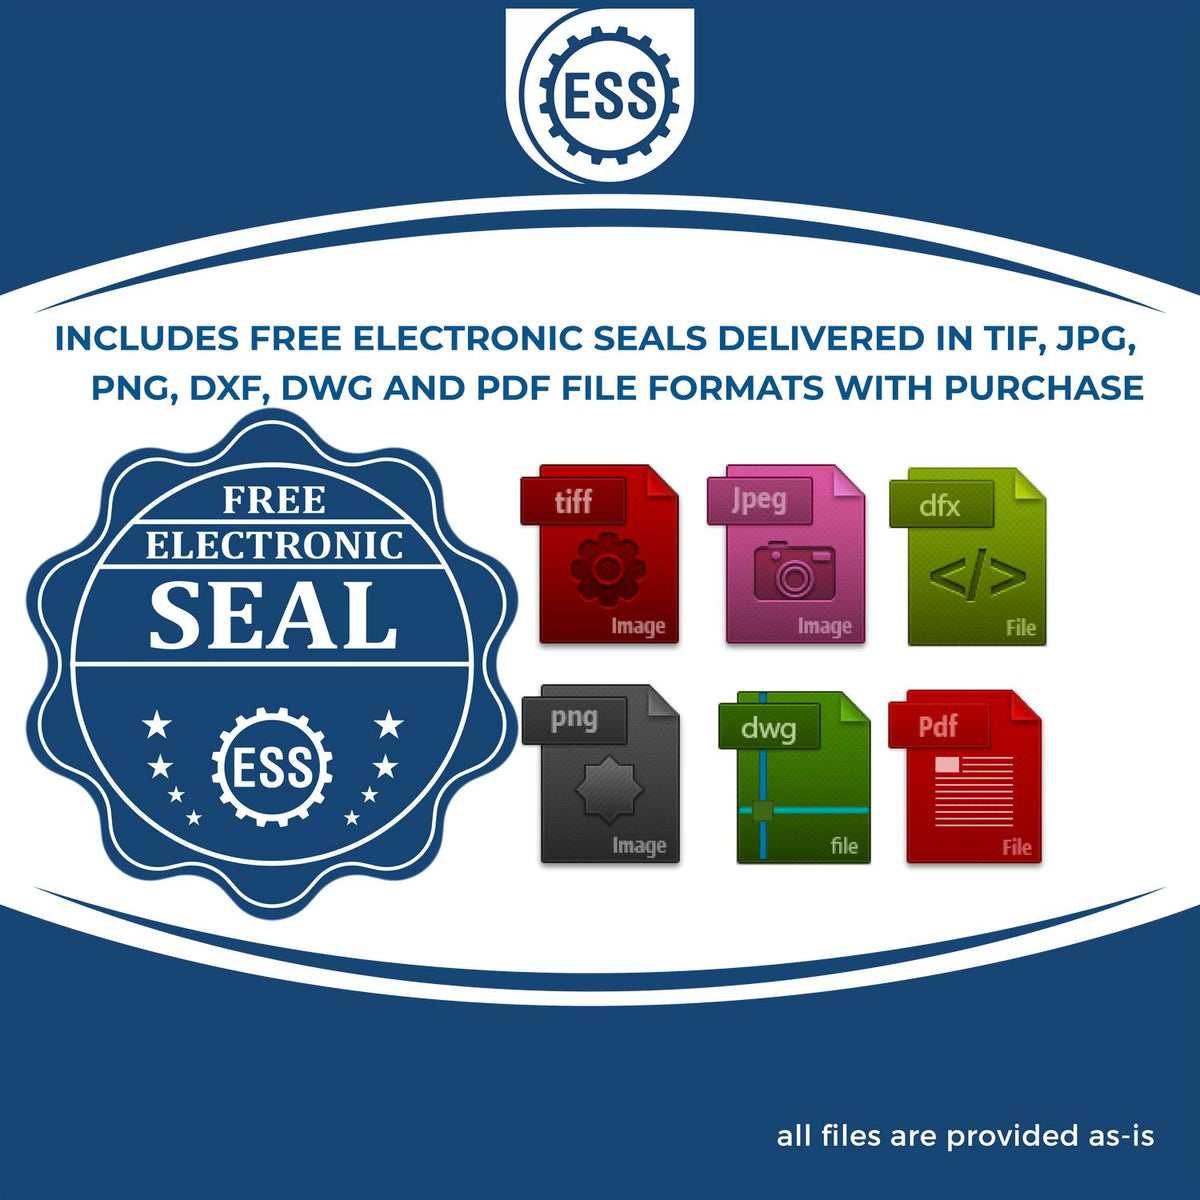 An infographic for the free electronic seal for the Hybrid South Dakota Engineer Seal illustrating the different file type icons such as DXF, DWG, TIF, JPG and PNG.